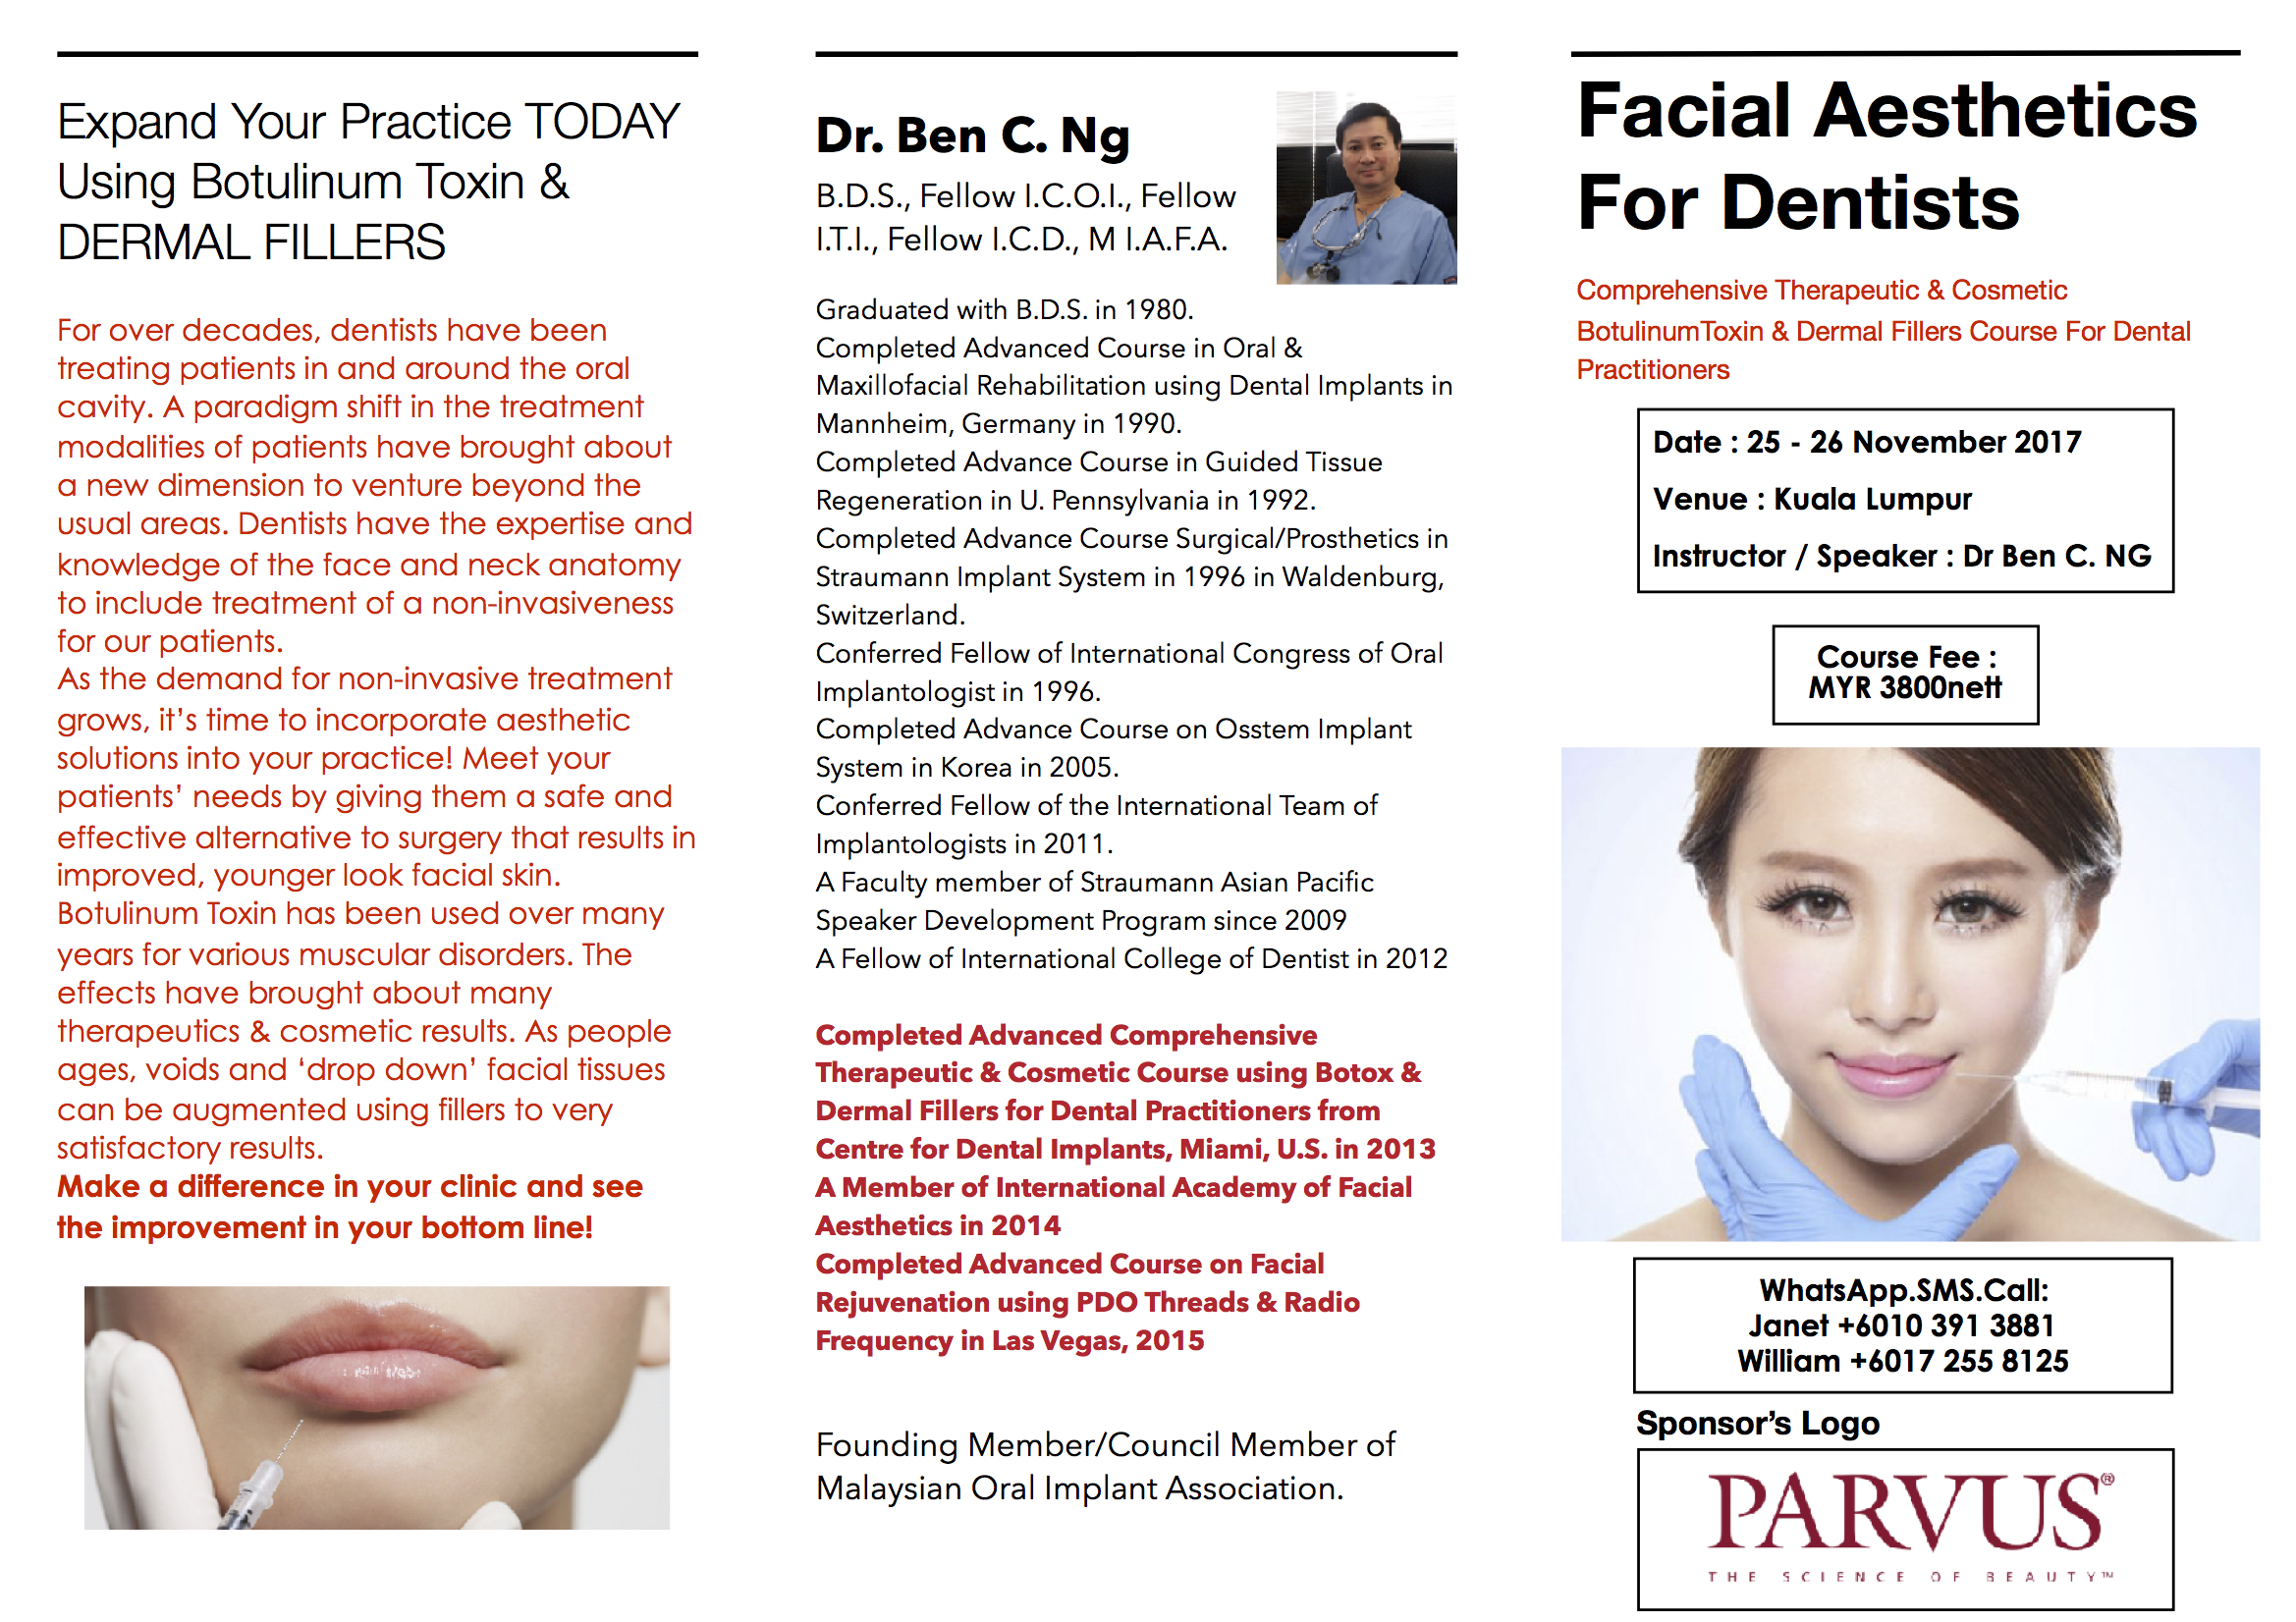 dentistsnearby-facial-aesthetics-malaysia-1-updated